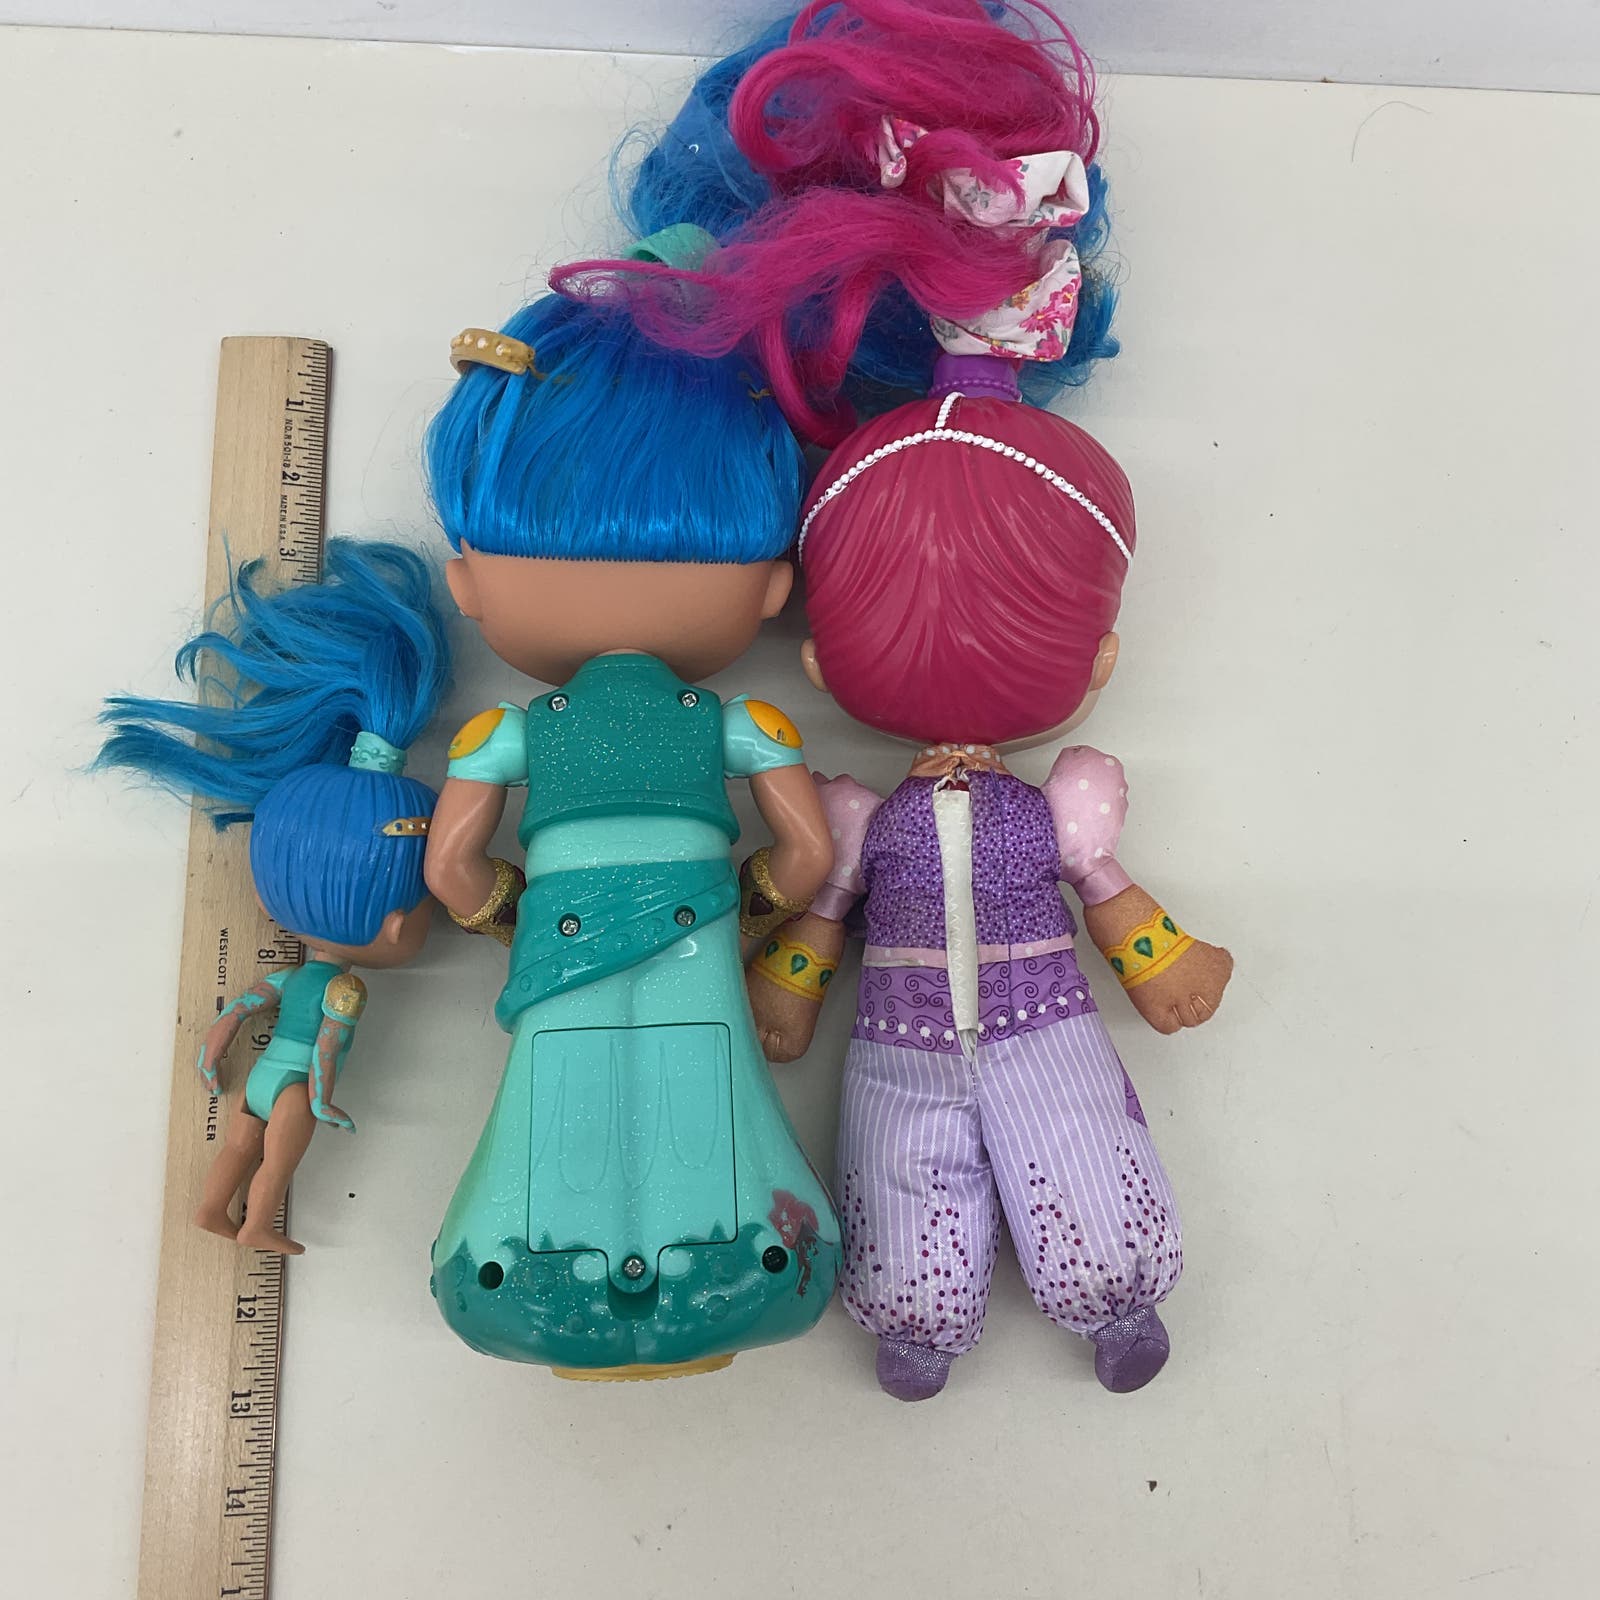 Preowned Nickelodeon Shimmer & Shine Girl Genie Play Dolls Used Loose Blue Pink - Warehouse Toys